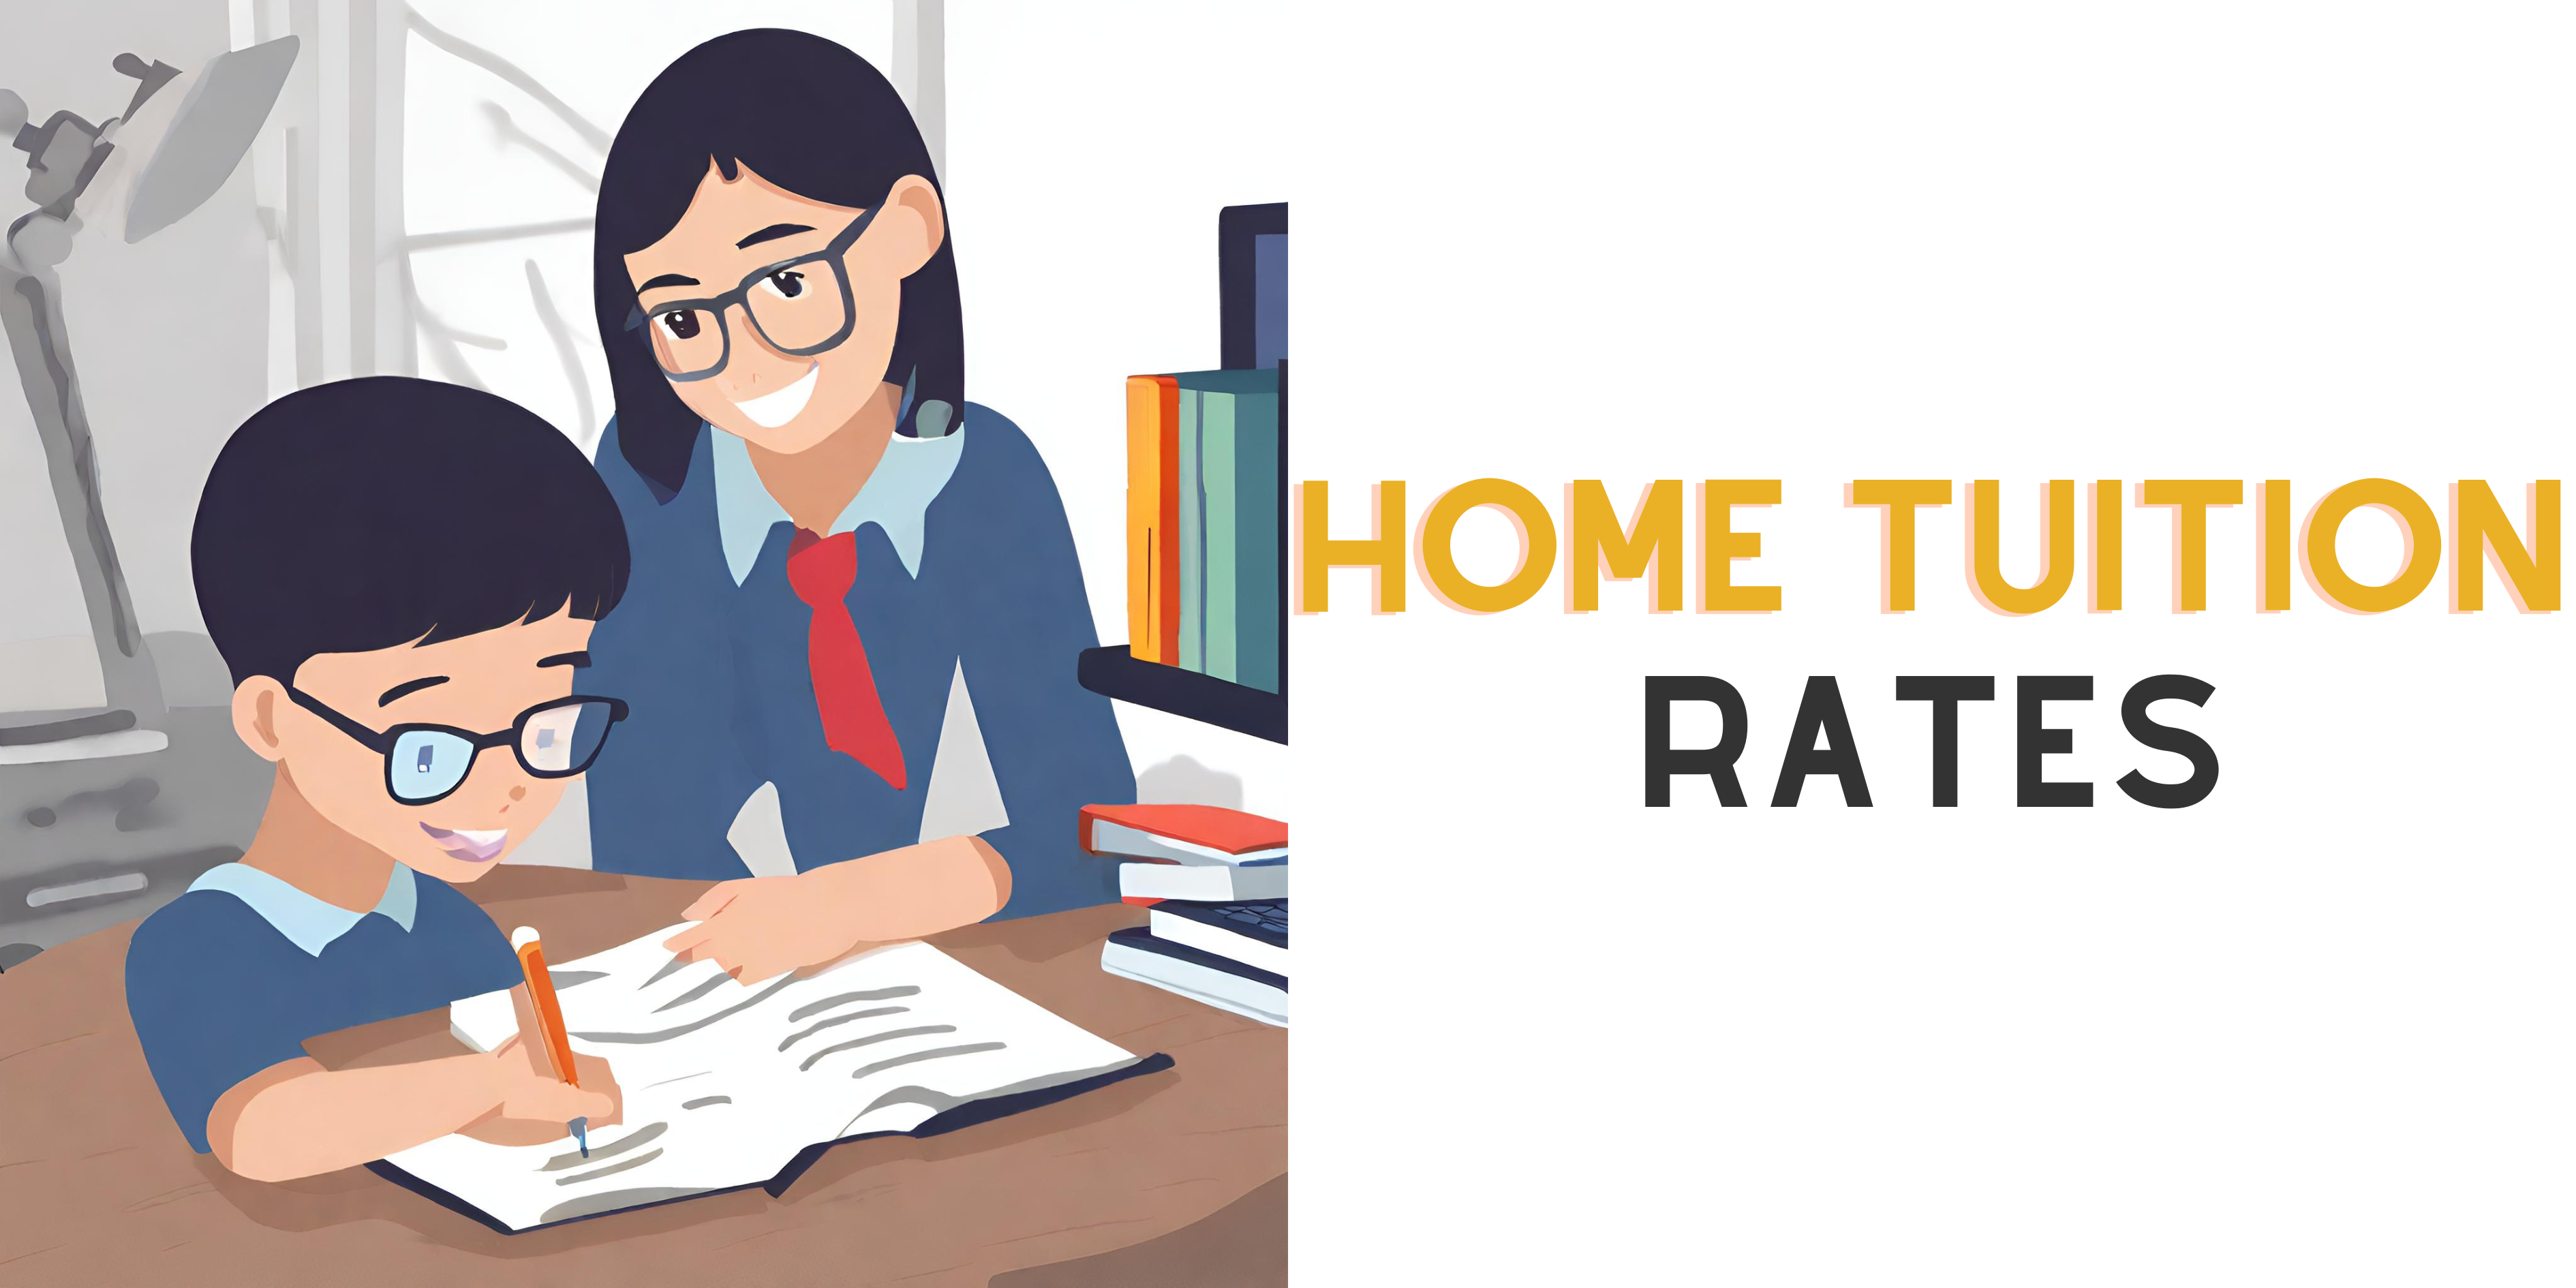 Home tuition rates